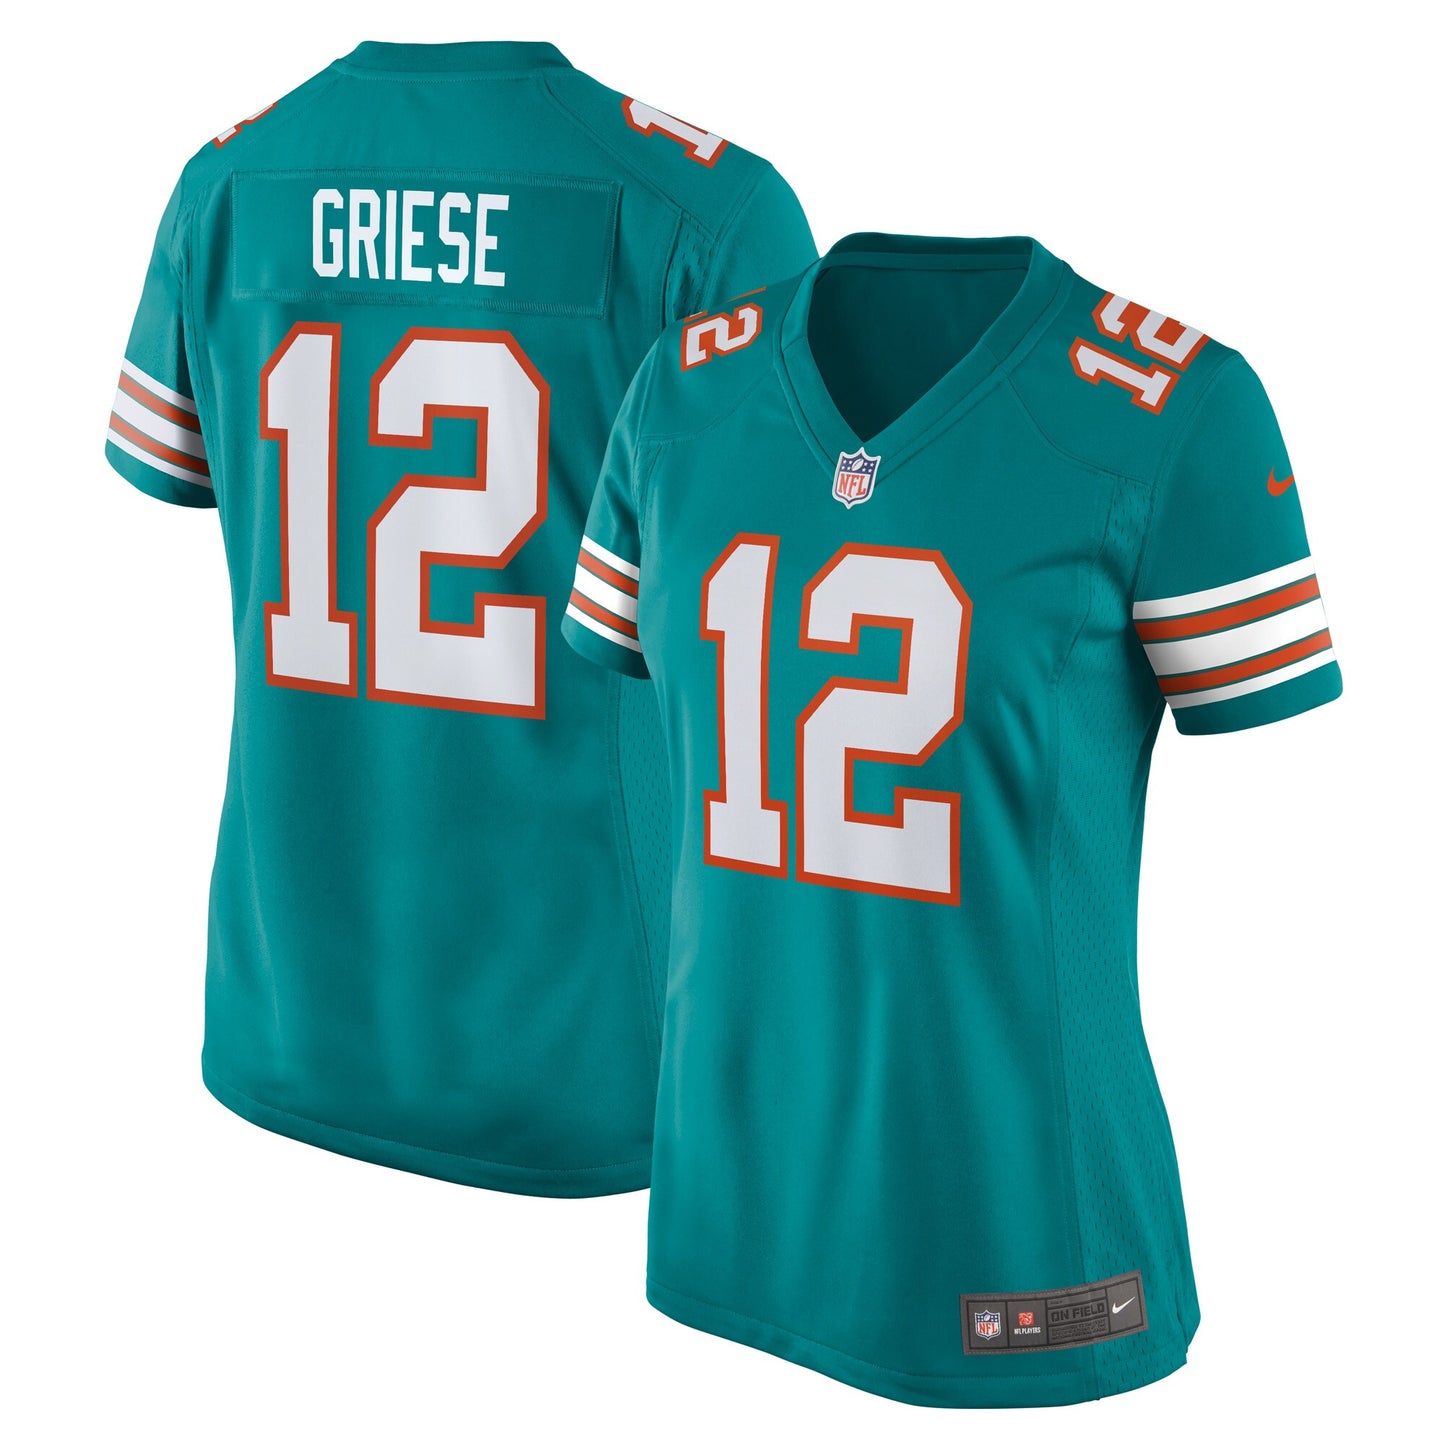 Bob Griese Miami Dolphins Nike Women's Retired Player Jersey - Aqua